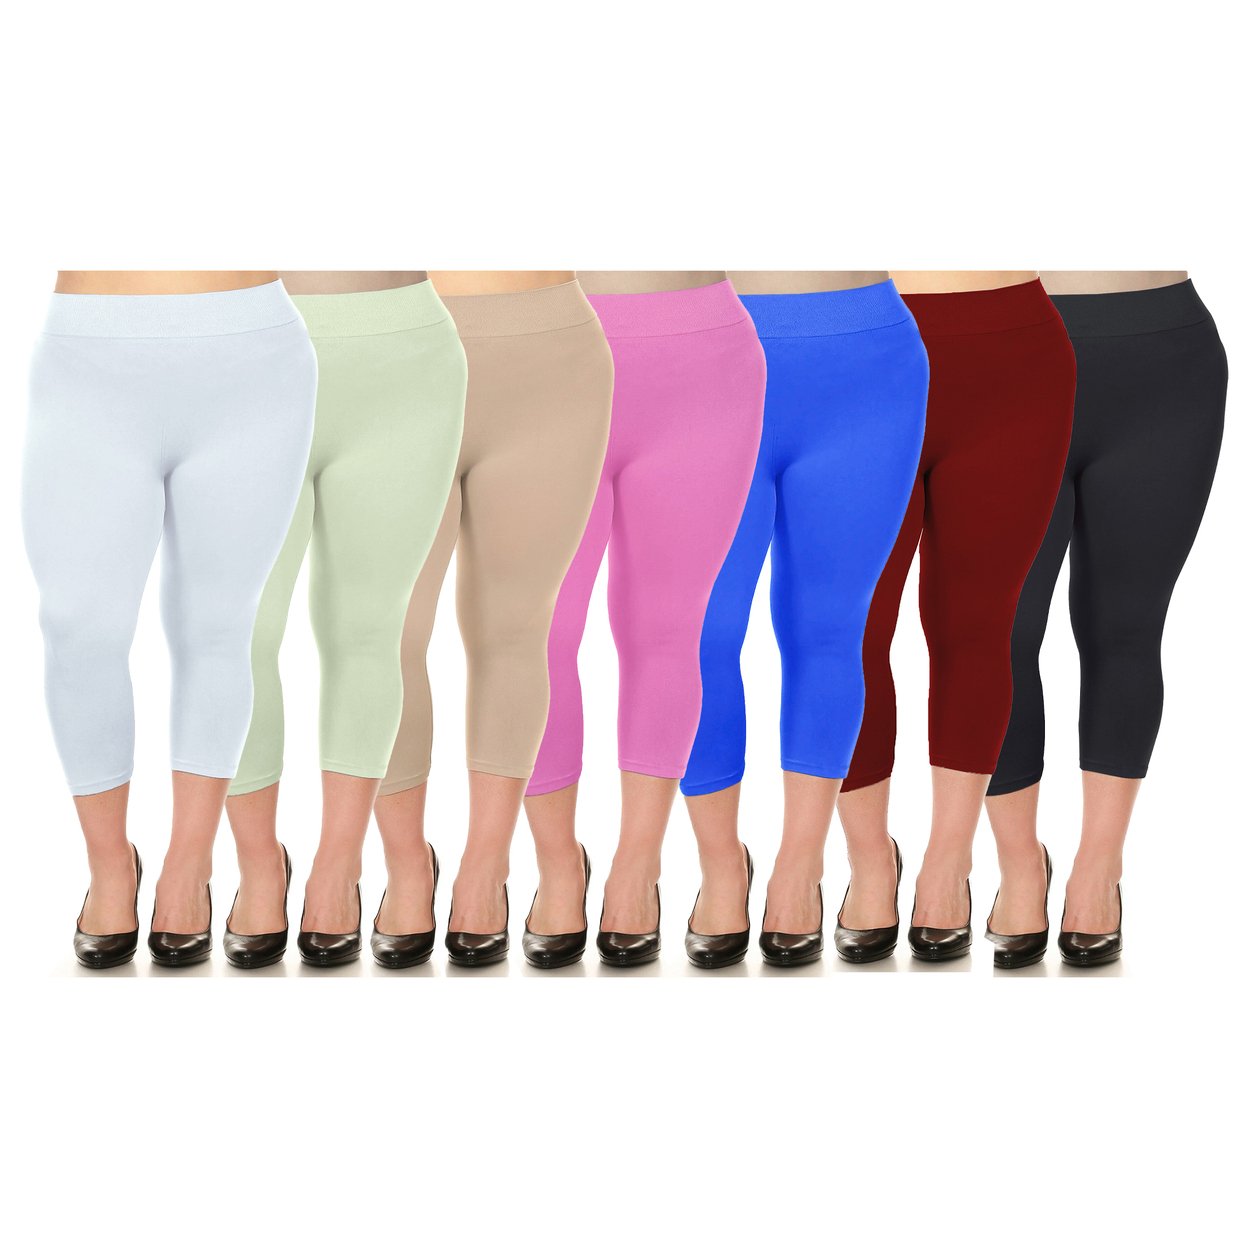 Women's Ultra-Soft High Waisted Smooth Stretch Active Yoga Capri Leggings Plus Size Available - Beige, 1x